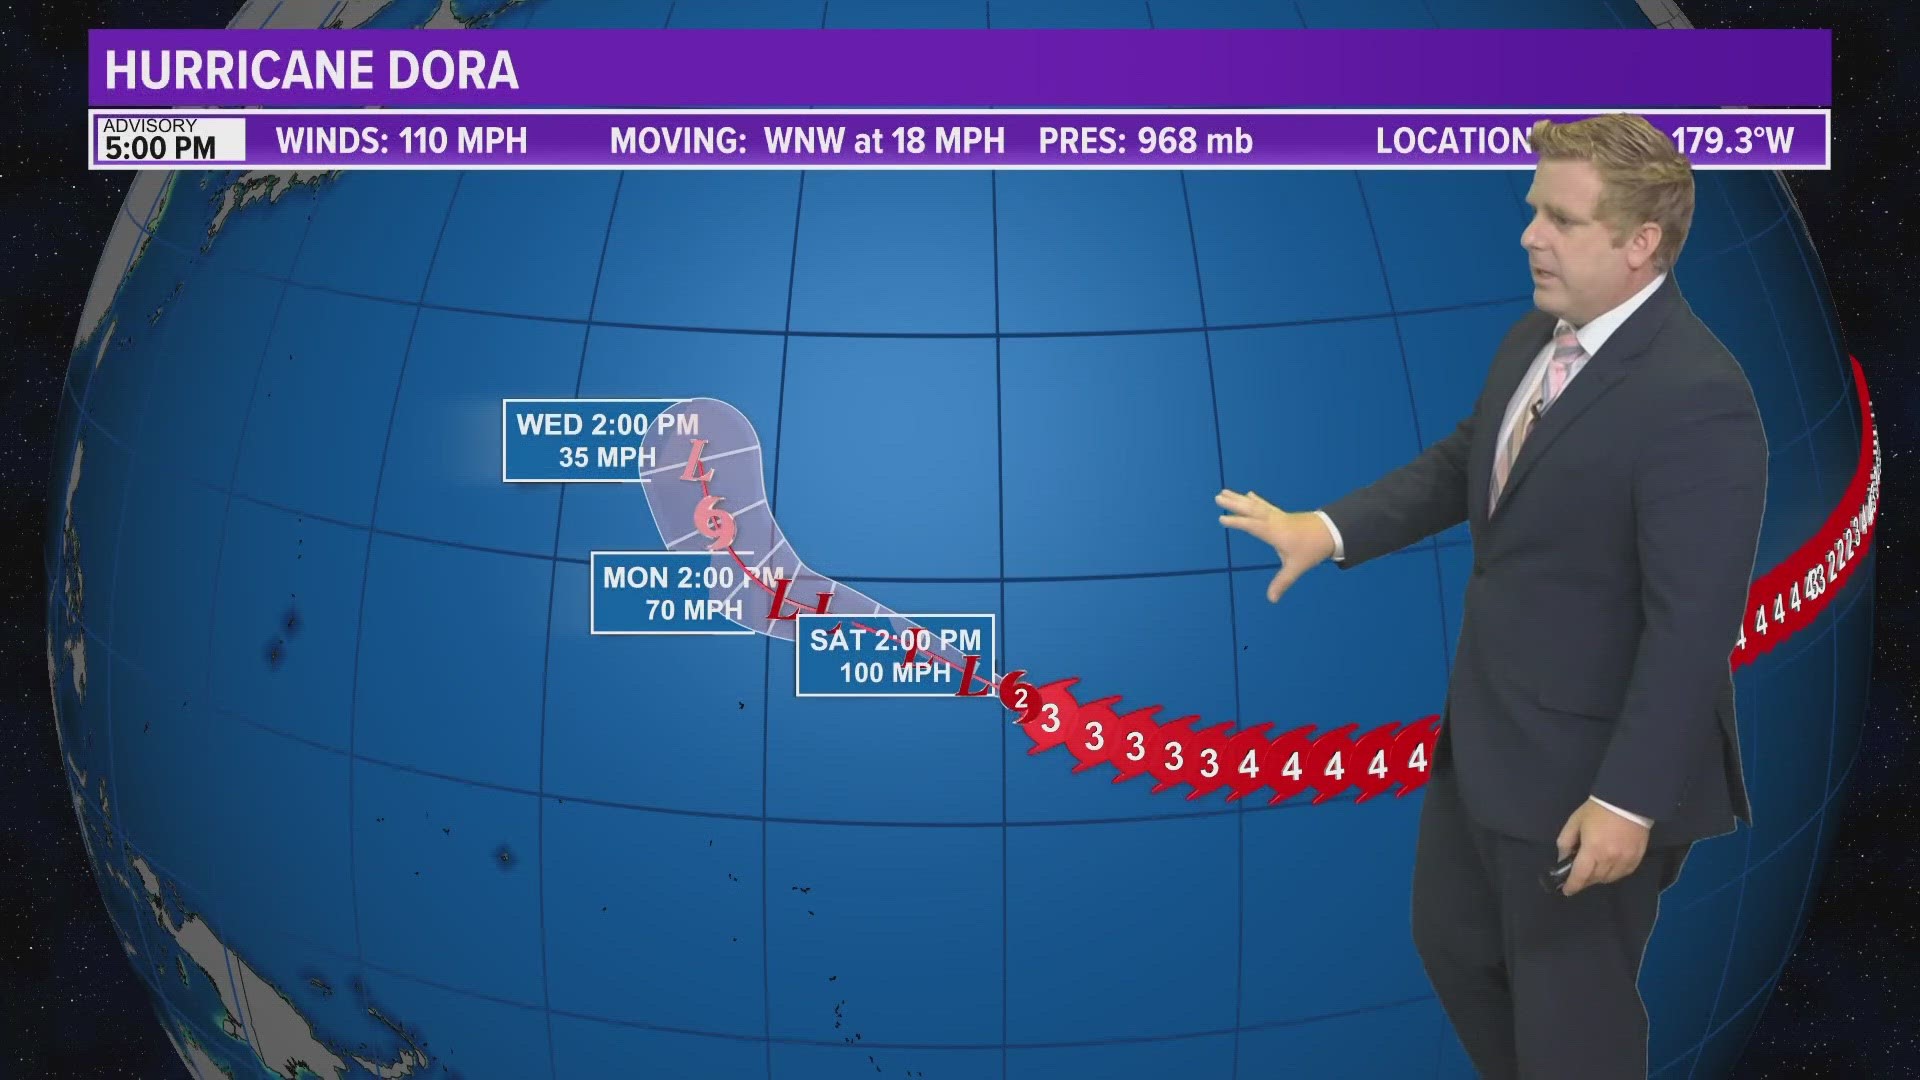 First Coast News Meteorologist Robert Speta says a rare event is taking place as Hurricane Dora became a typhoon after crossing the international dateline Friday.